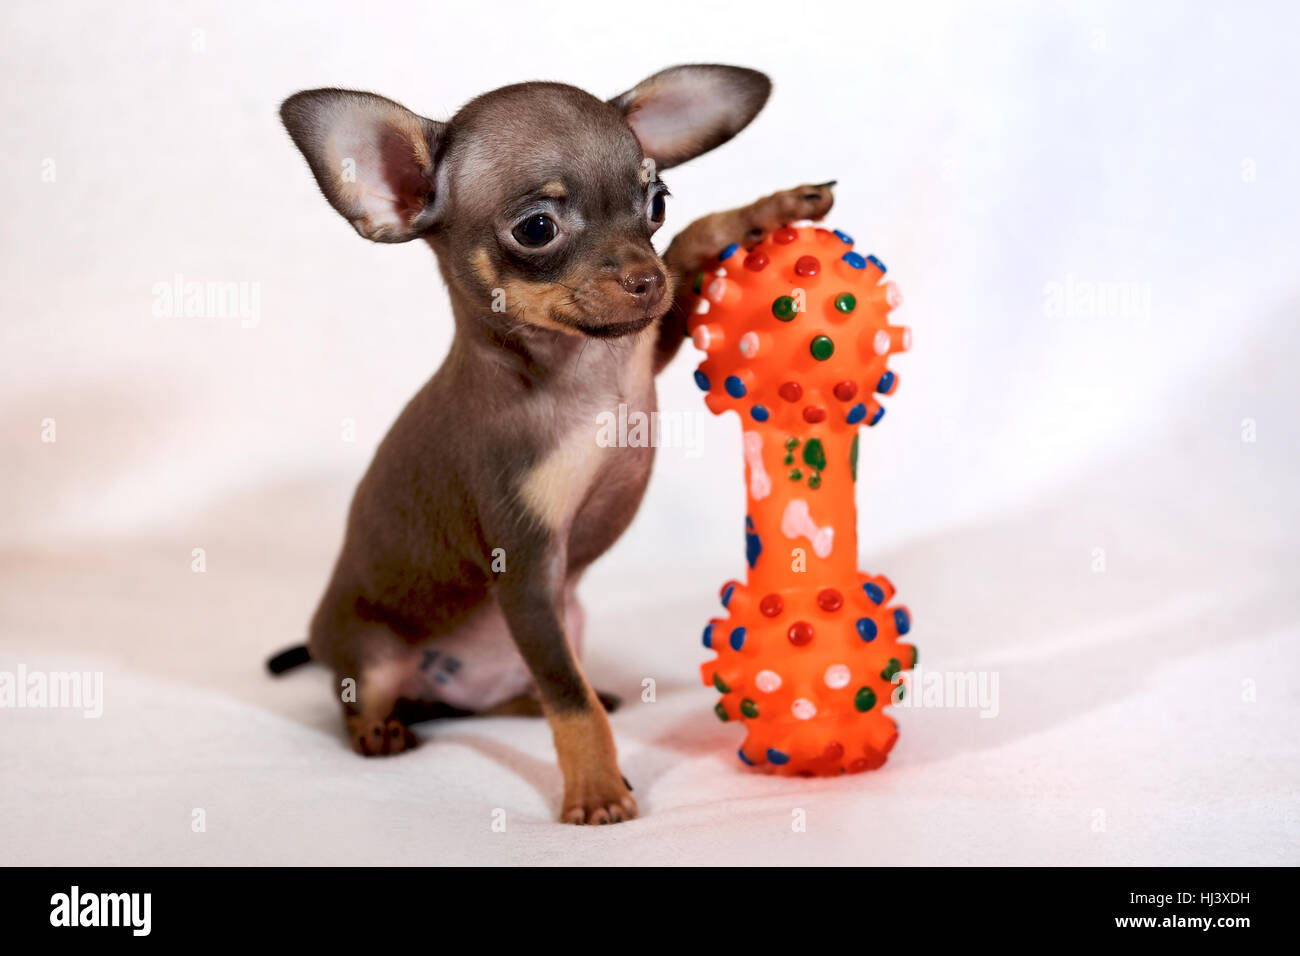 Russian Toy High Resolution Stock Photography And Images Alamy